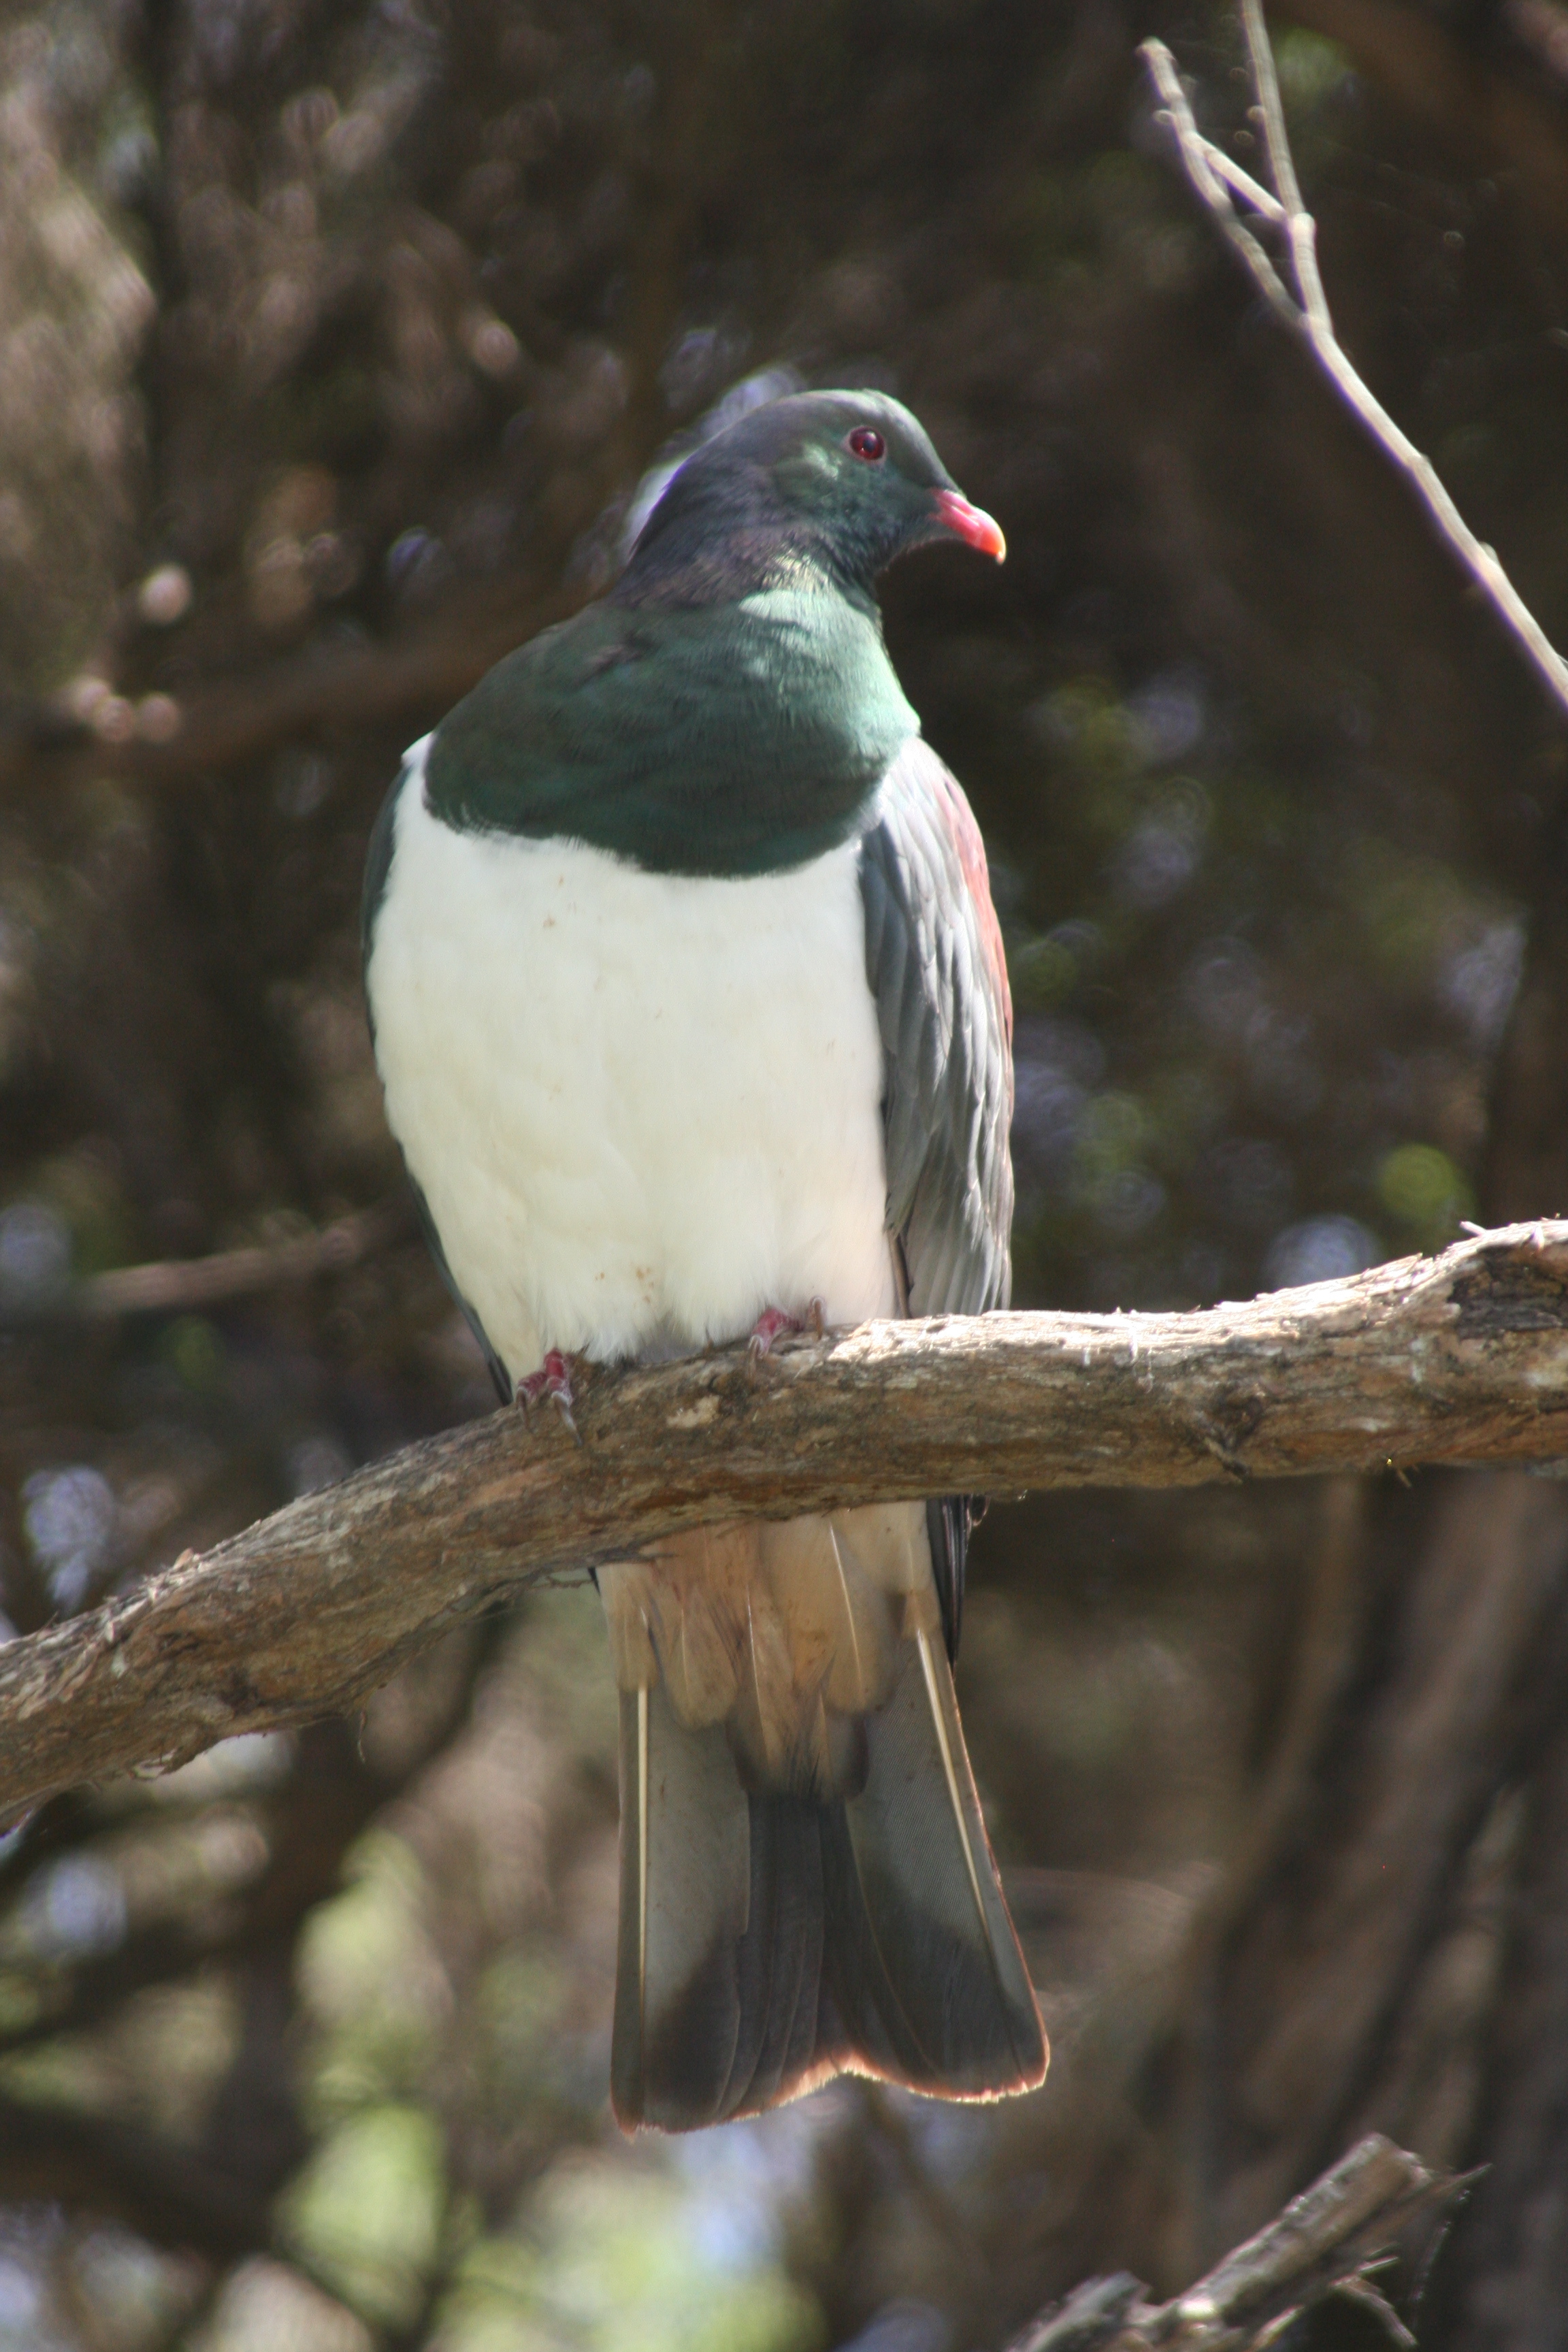 New Zealand pigeon. Image credit: Flickr, Duncan (CC BY/SA 2.0 DEED)